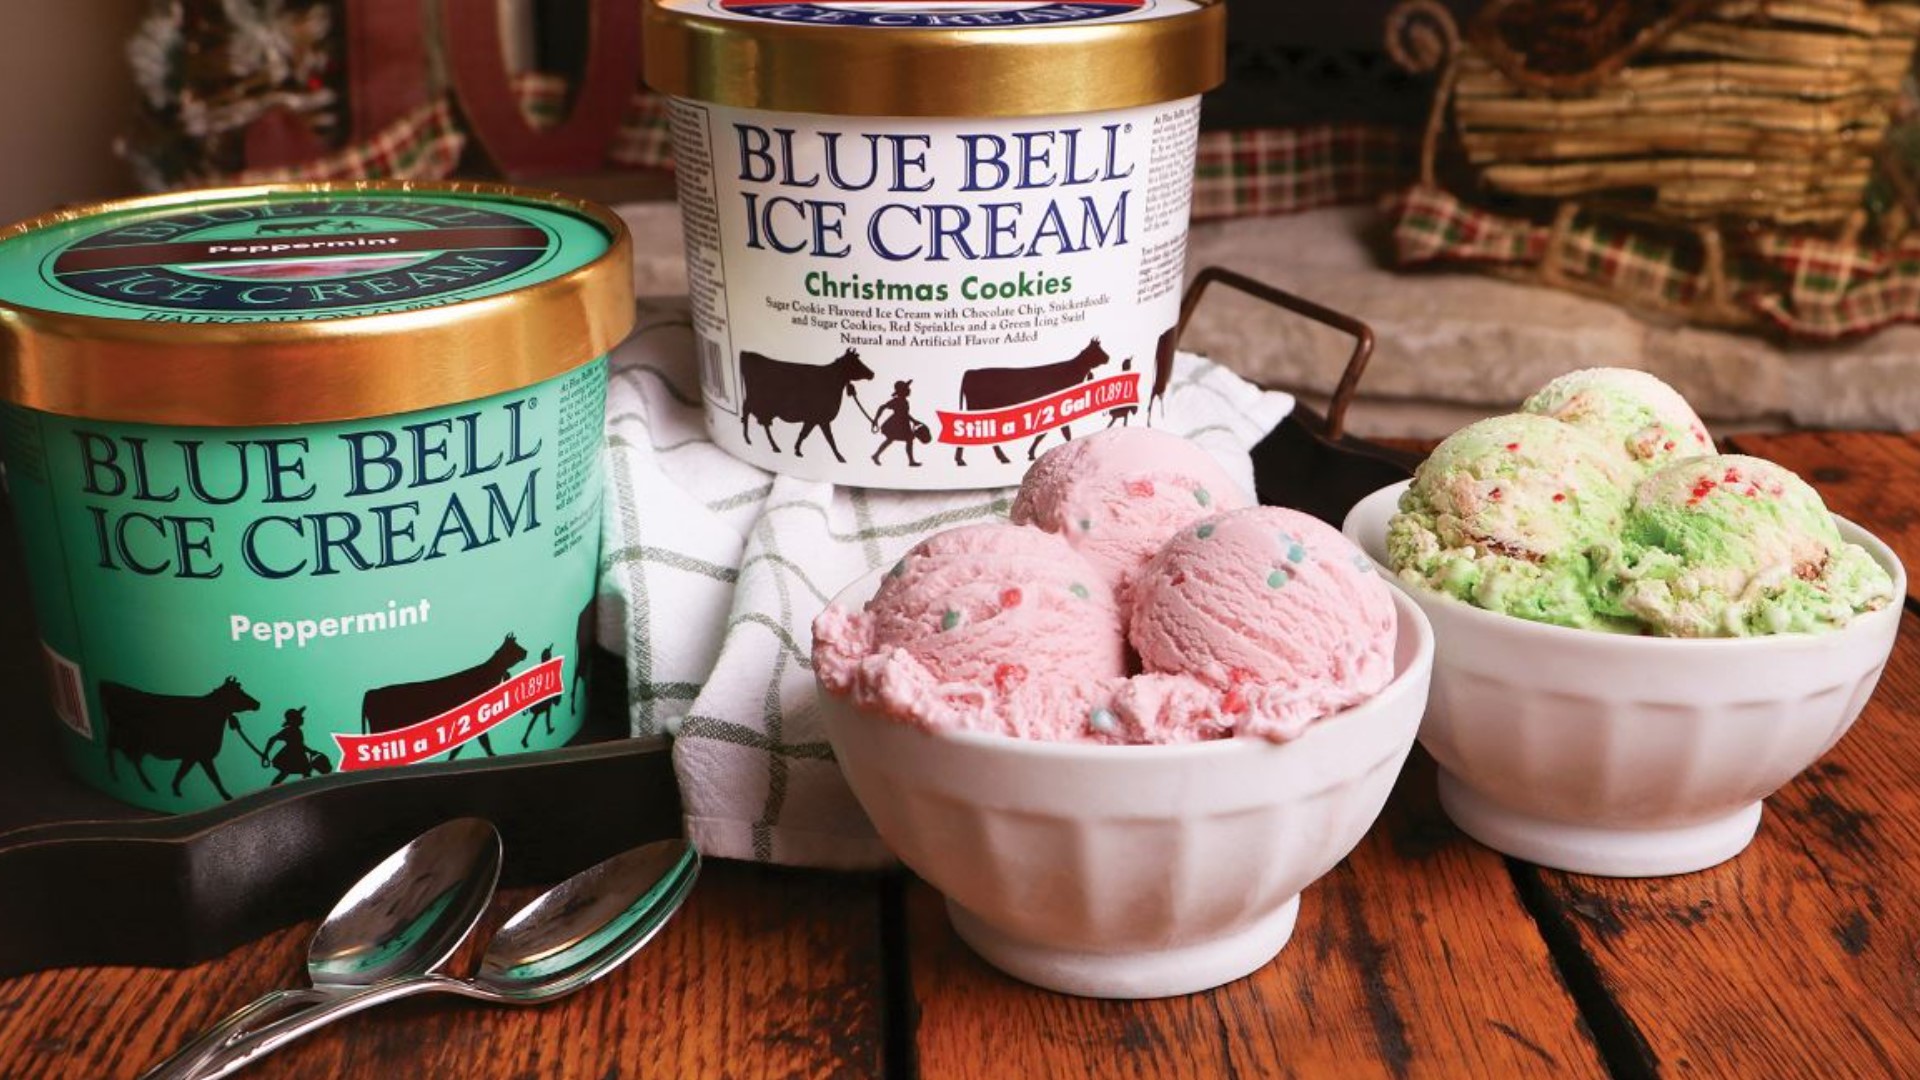 Blue Bell Released Christmas Cookies Ice Cream So Bring On The Holidays